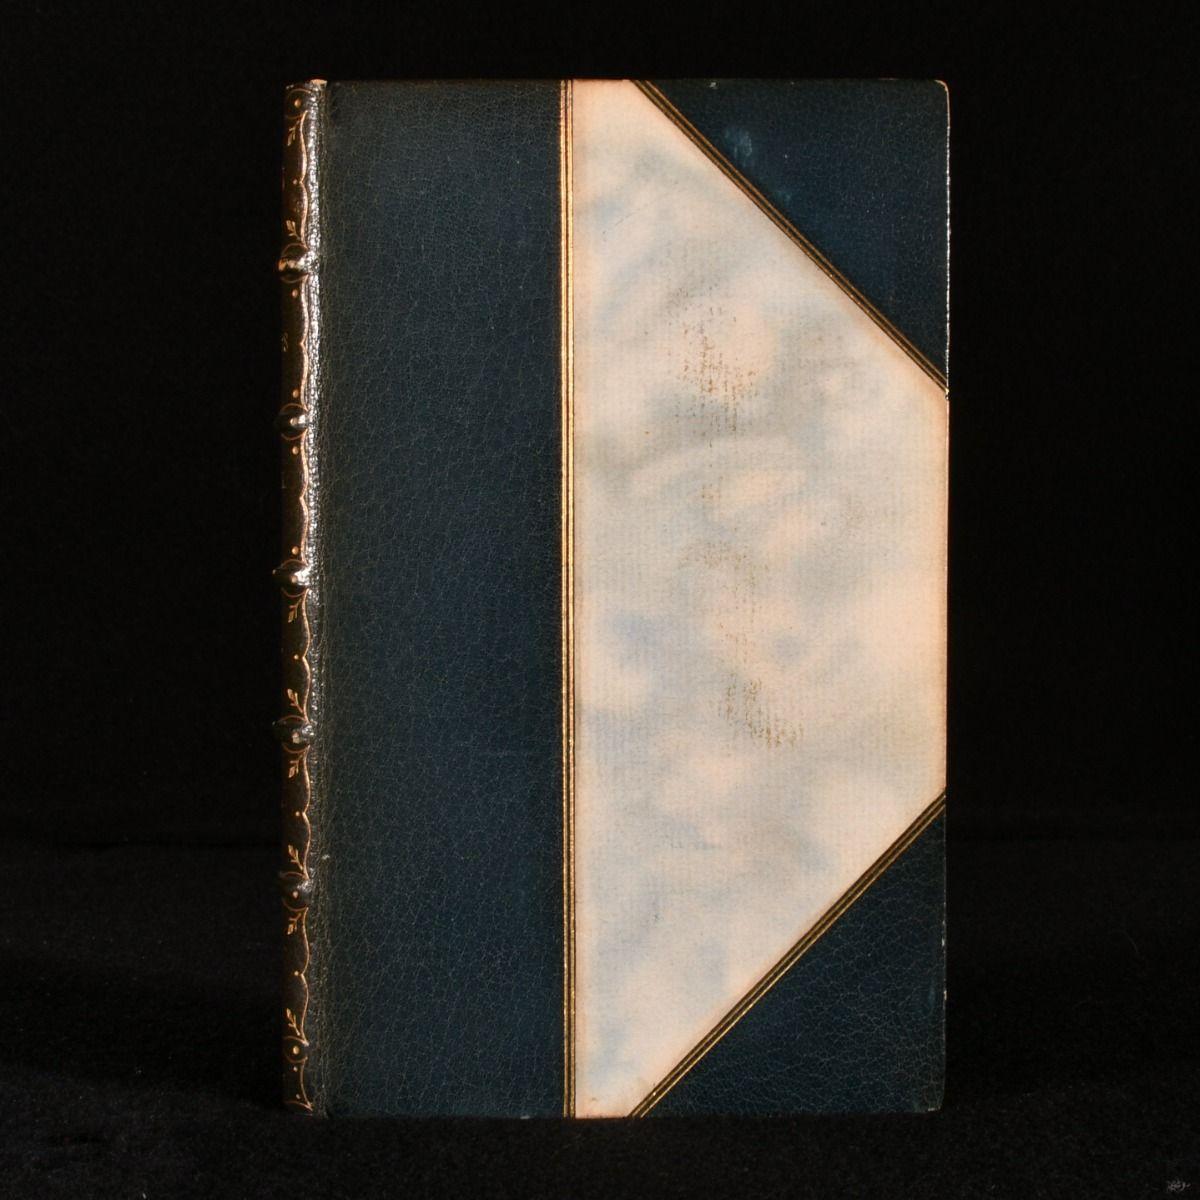 A beautifully bound set of the collected works of Robert Burns, a wonderful example of the poetry of the National Bard, complete with illustrations throughout.

In a half crushed morocco binding with marbled paper to the boards by W. Worsfold and C.